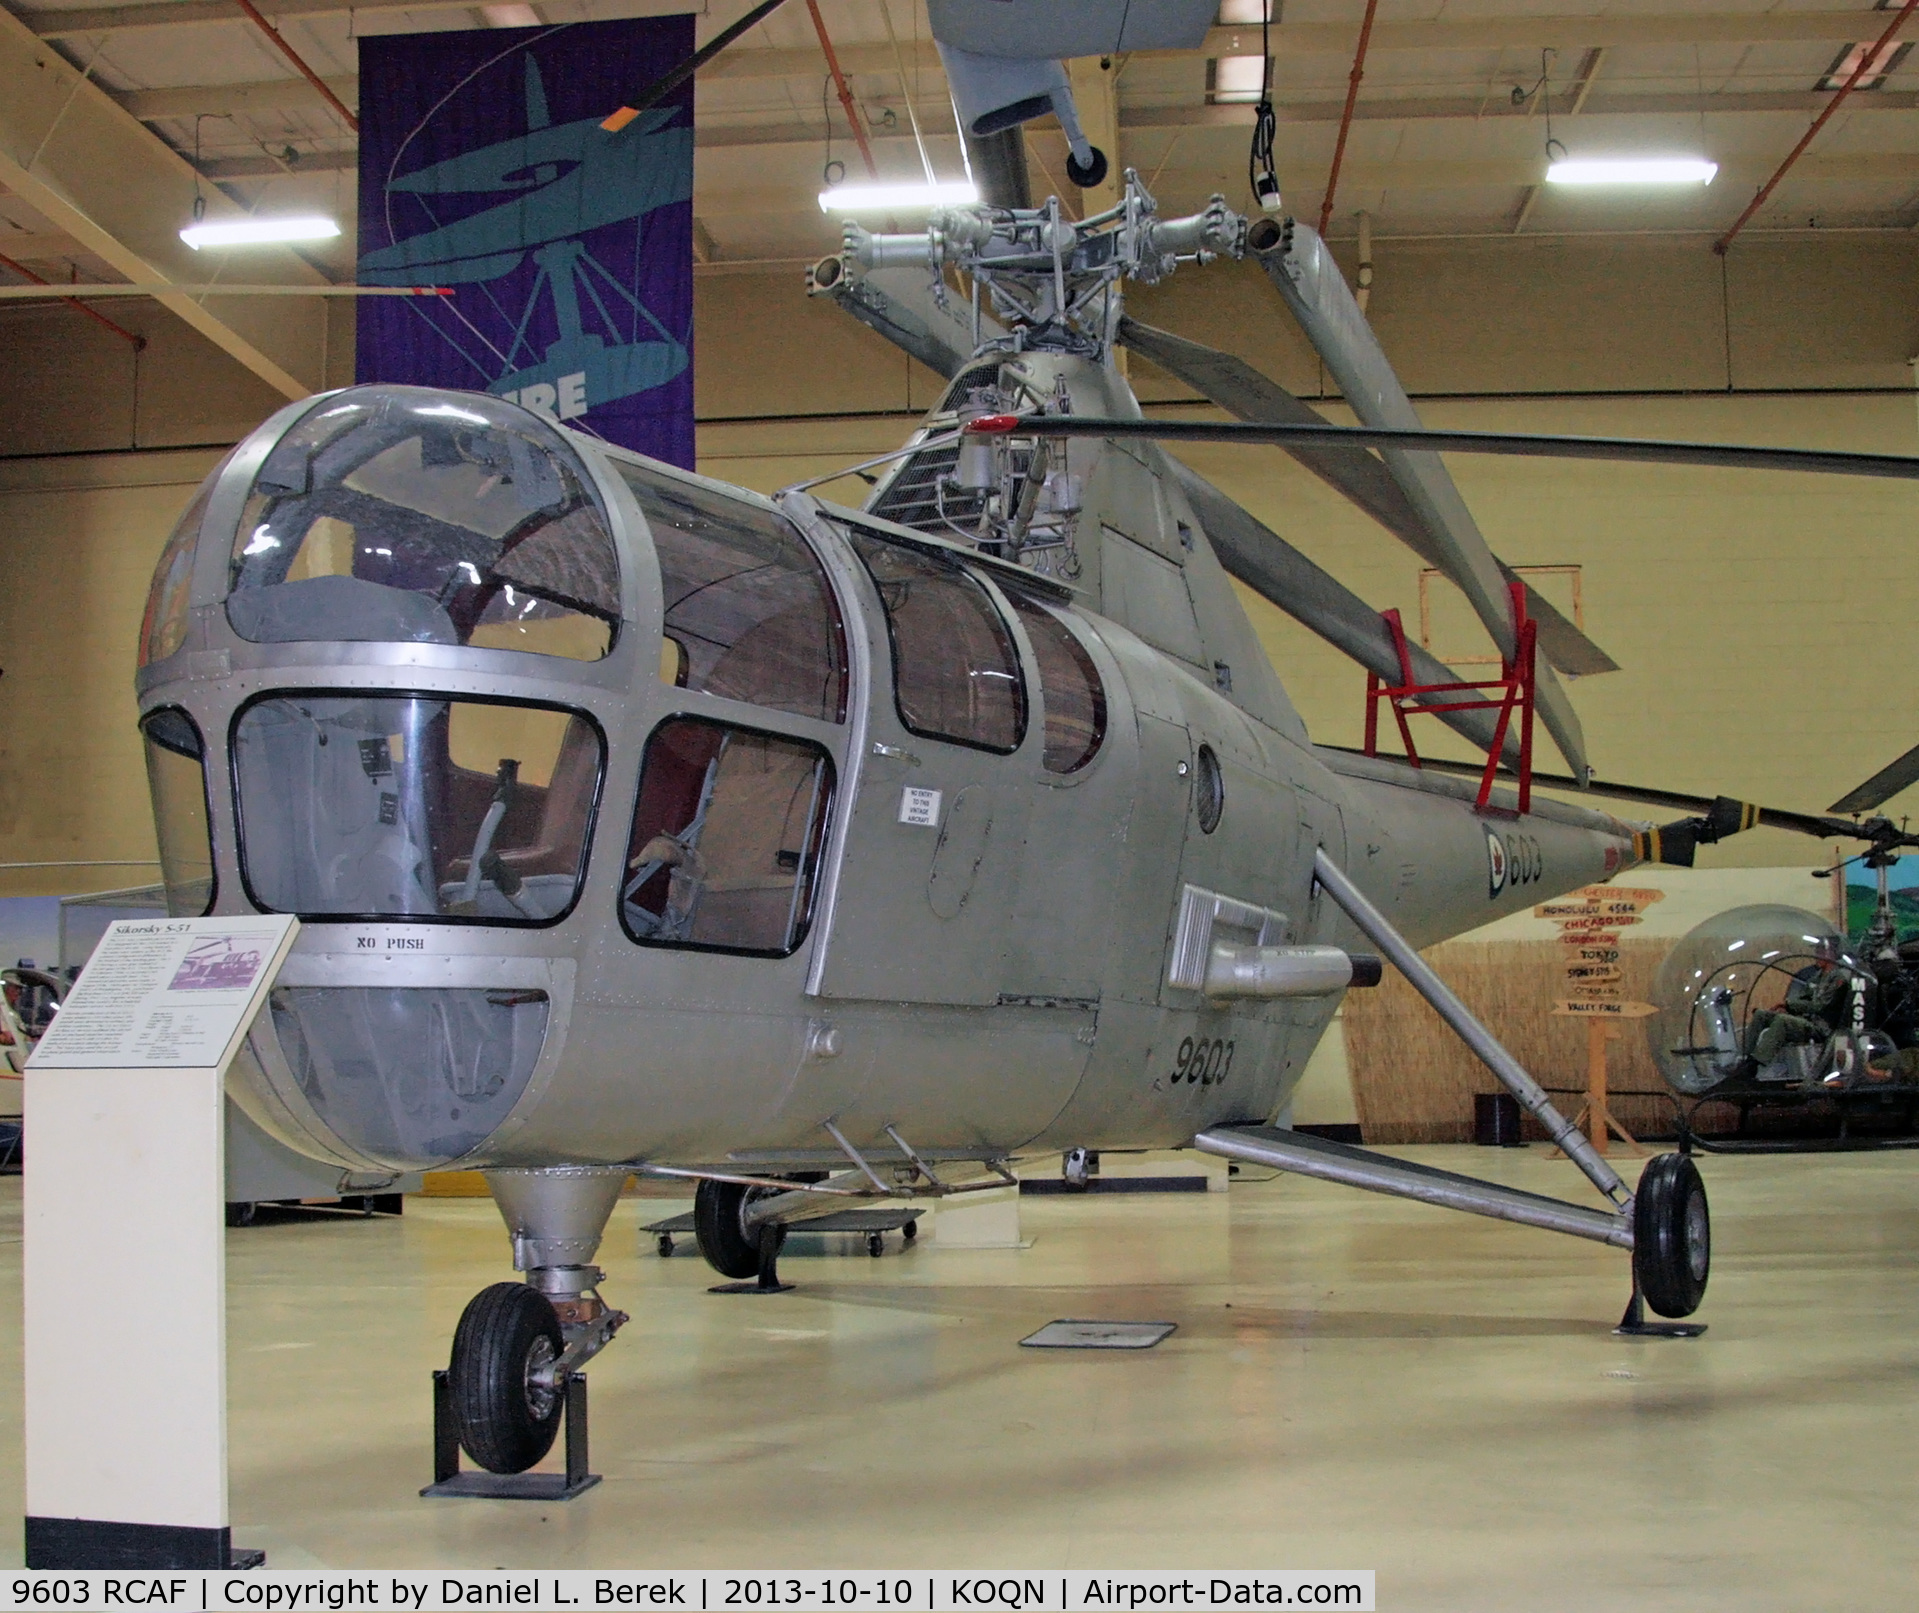 9603 RCAF, 1947 Sikorsky S-51 C/N 5130, This fine vintage helicopter, wearing Royal Canada Air Force markings, has been preserved at the American Helicopter Museum.